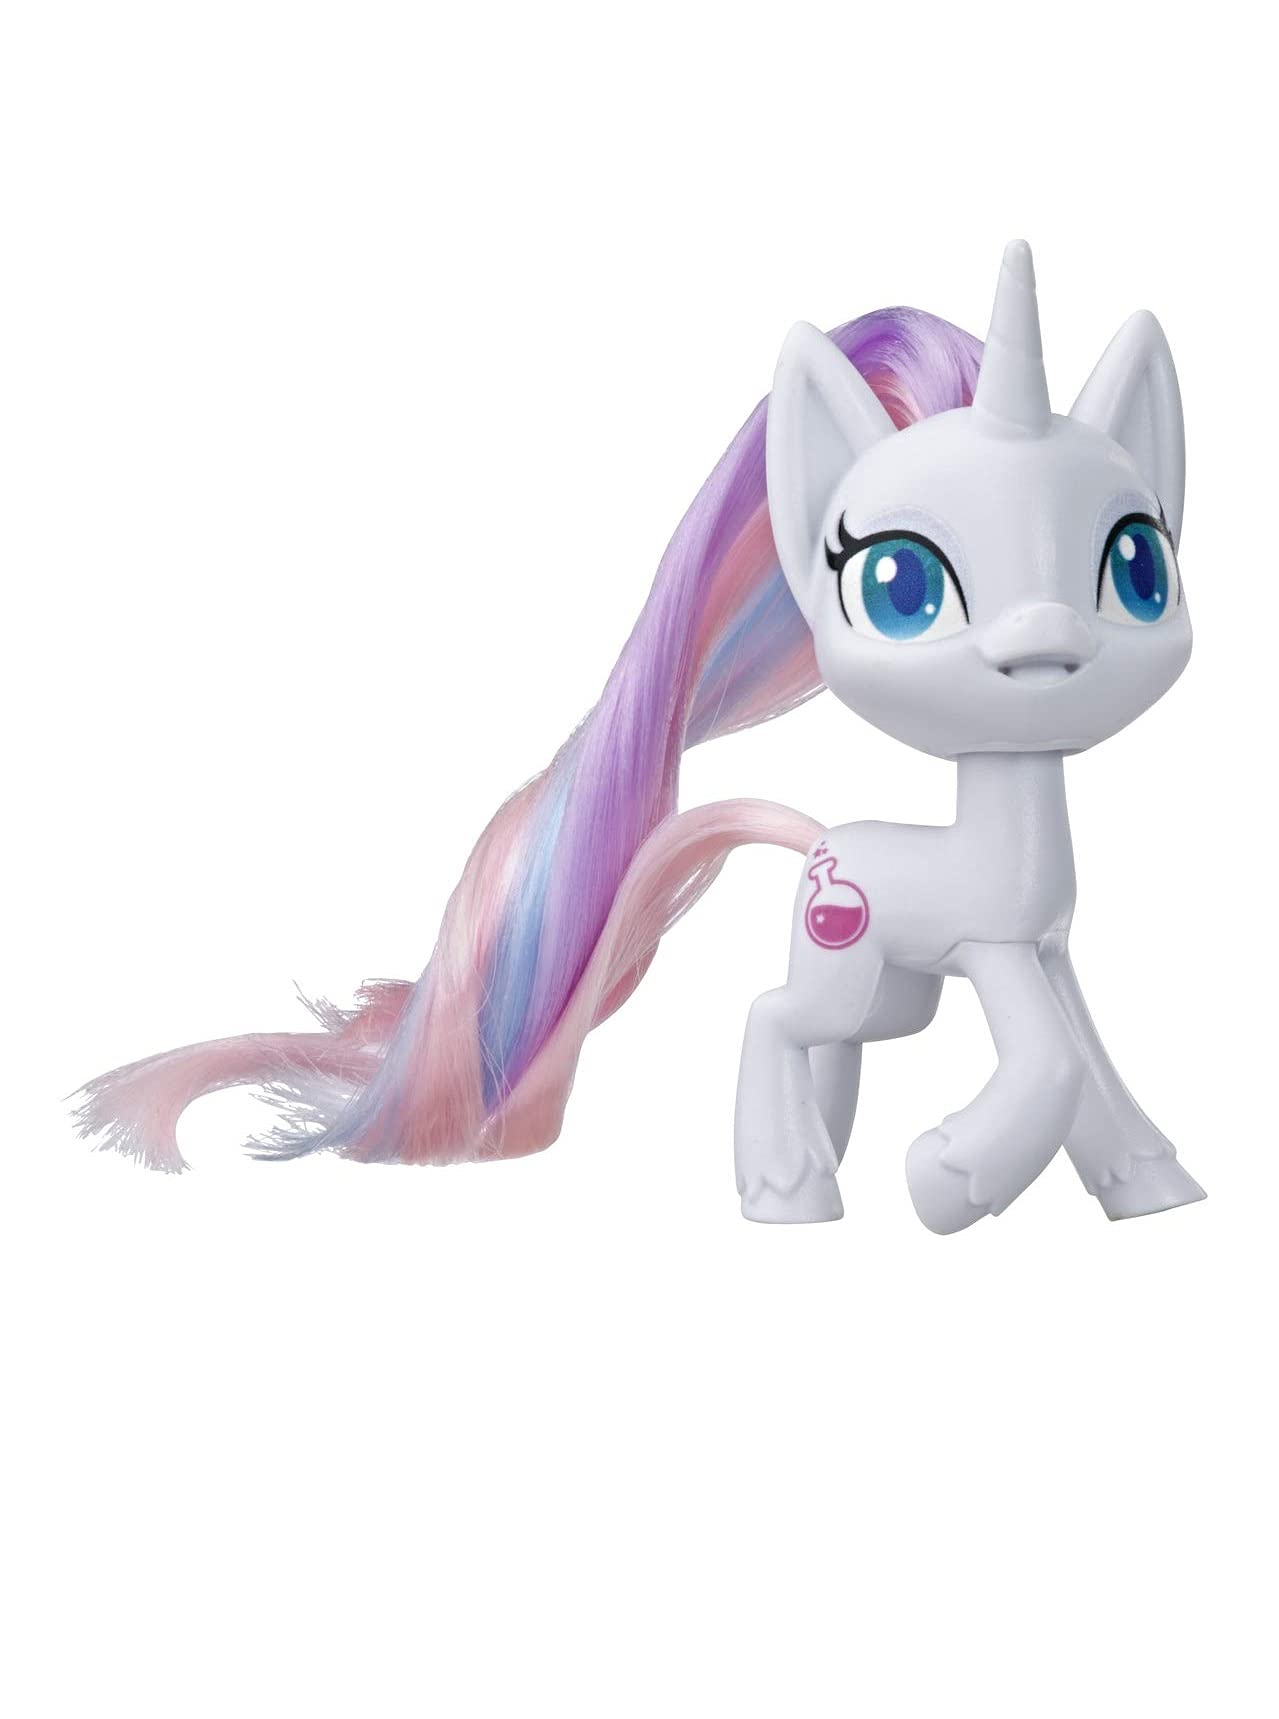 My Little Pony Potion Nova Potion Pony Figure -- 3-Inch White Pony Toy with Brushable Hair, Comb, and 4 Surprise Accessories